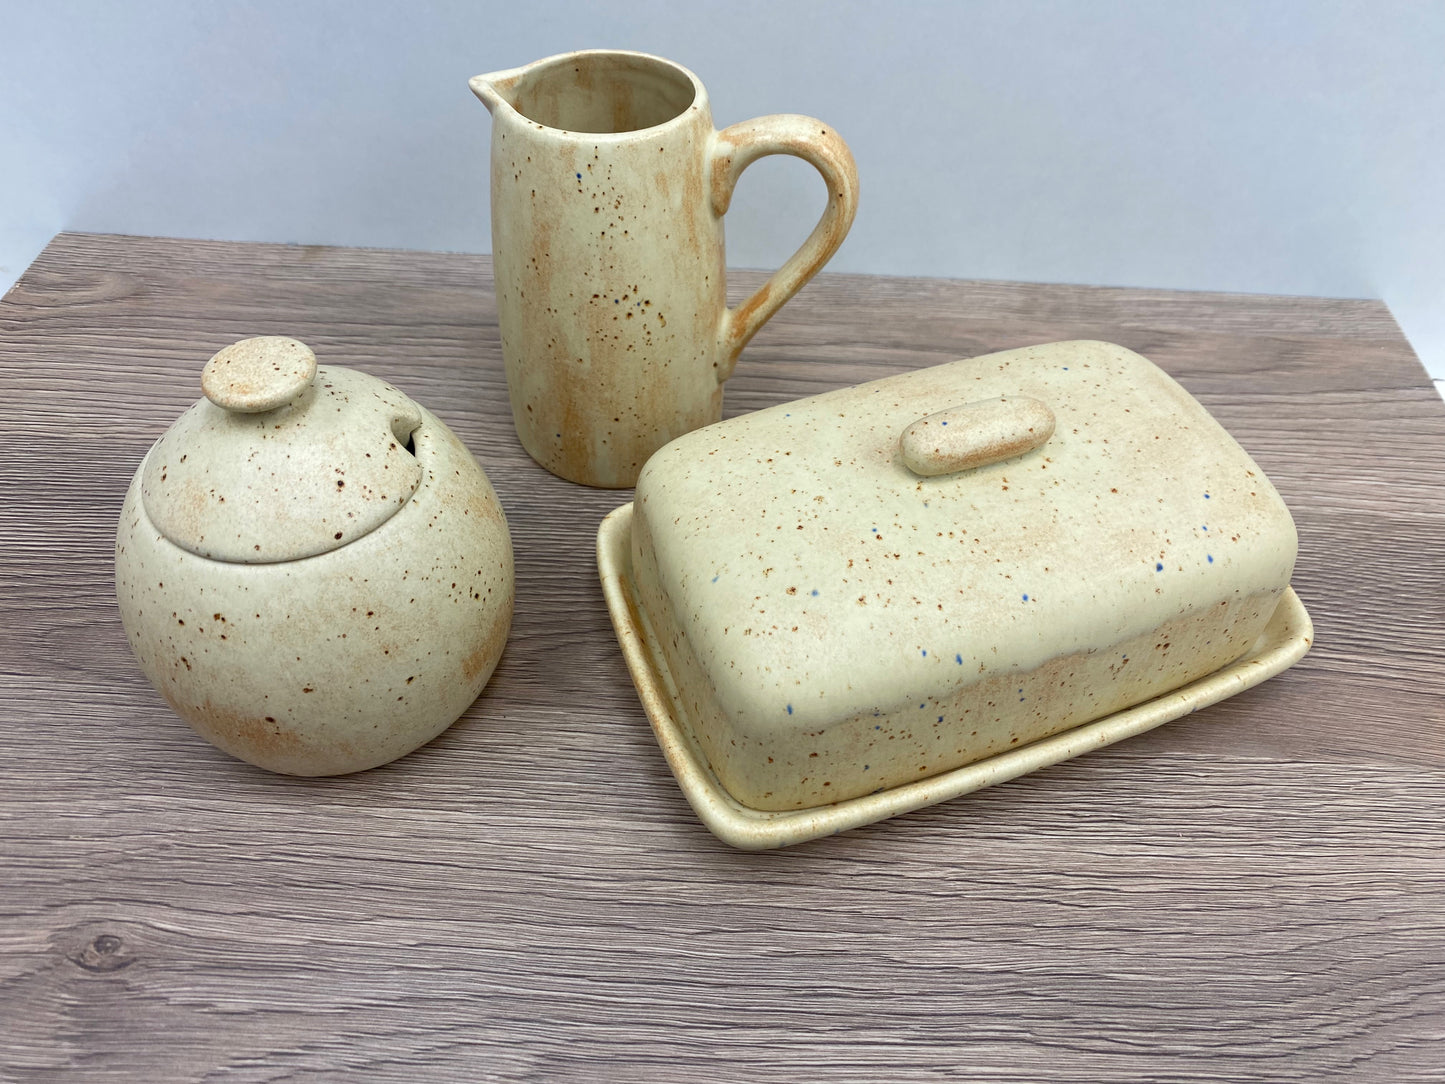 Butter Dish, Sugar Bowl and Milk Jug Set with Spoon Rest - Oatmeal Glaze